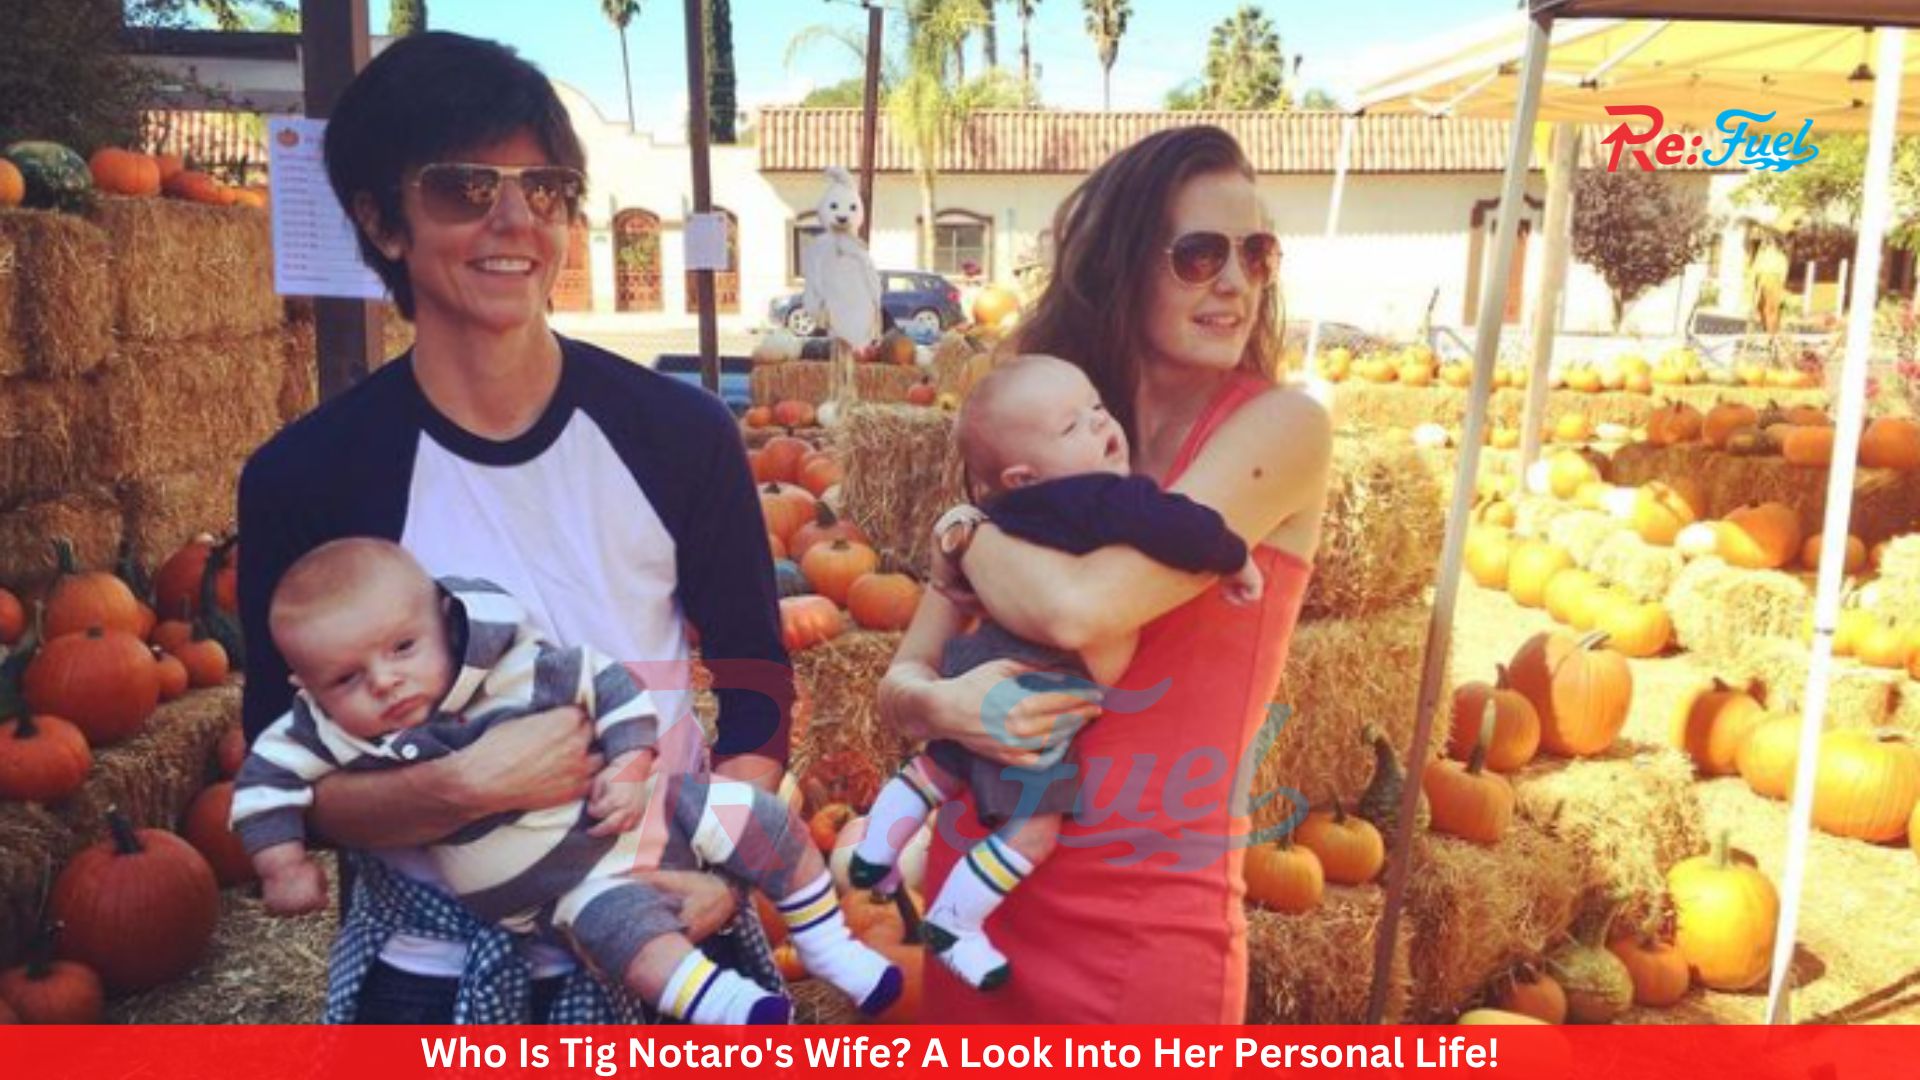 Who Is Tig Notaro's Wife? A Look Into Her Personal Life!